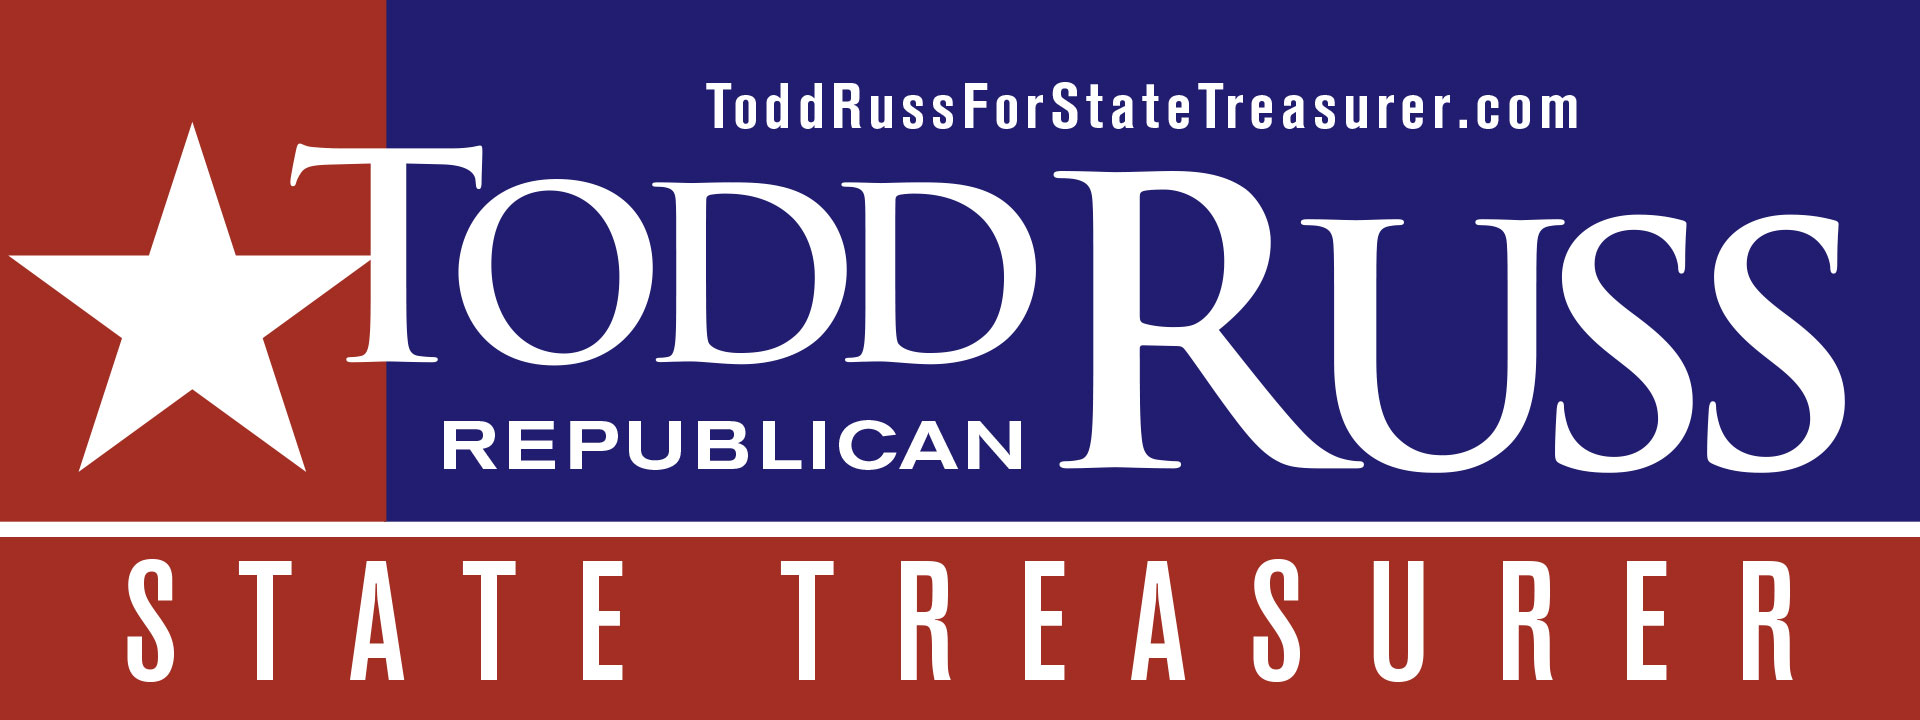 Todd Russ for State Treasurer